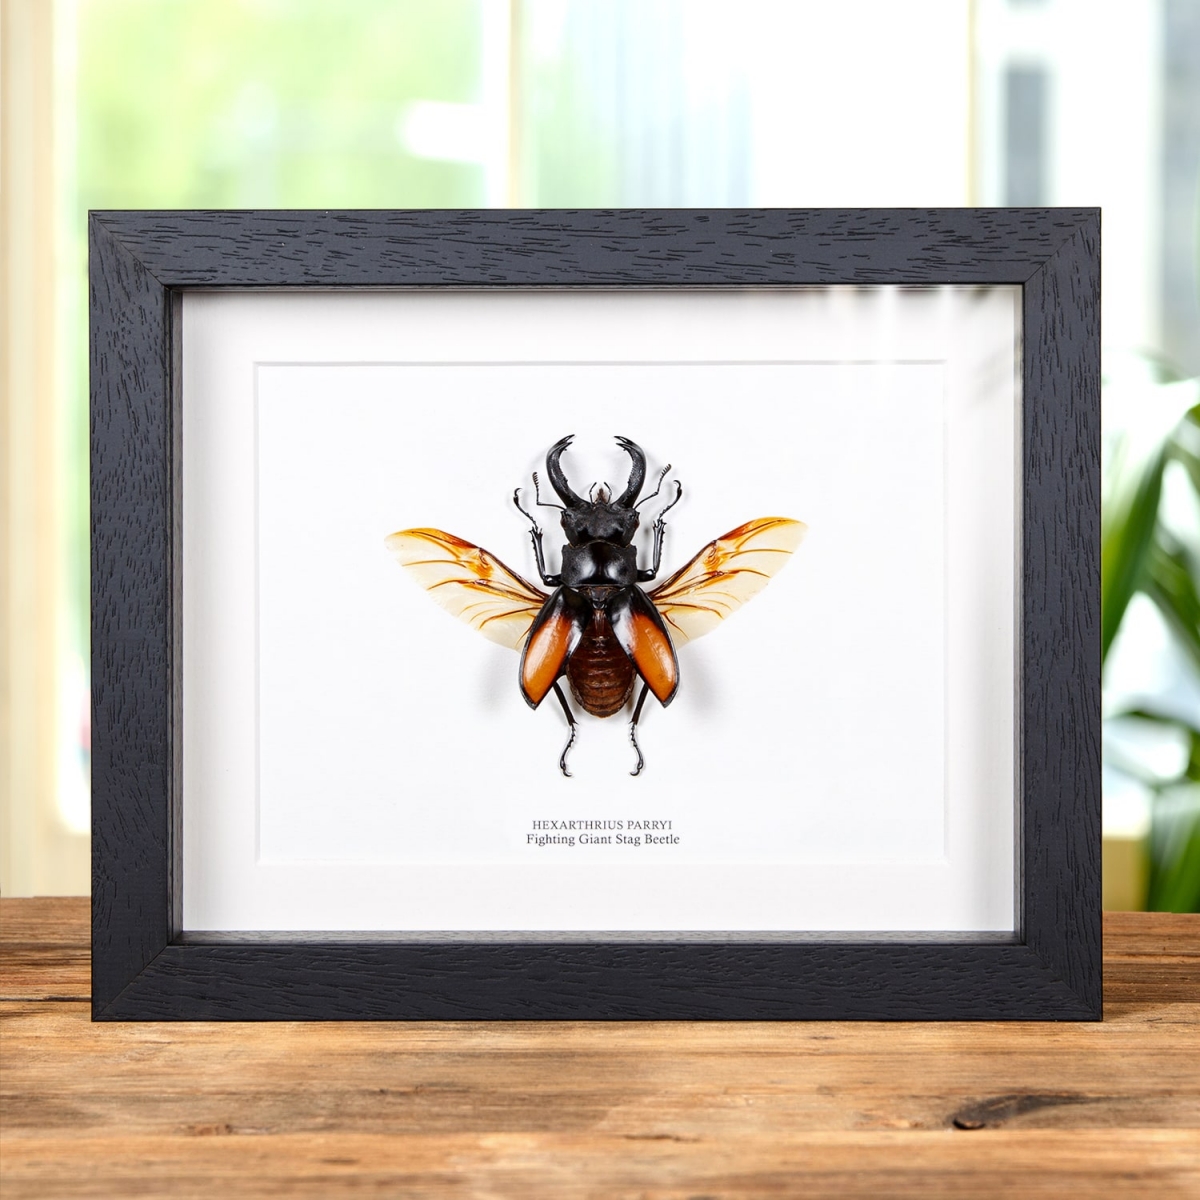 Minibeast Fighting Giant Stag Beetle in Box Frame (Hexarthrius parryi)